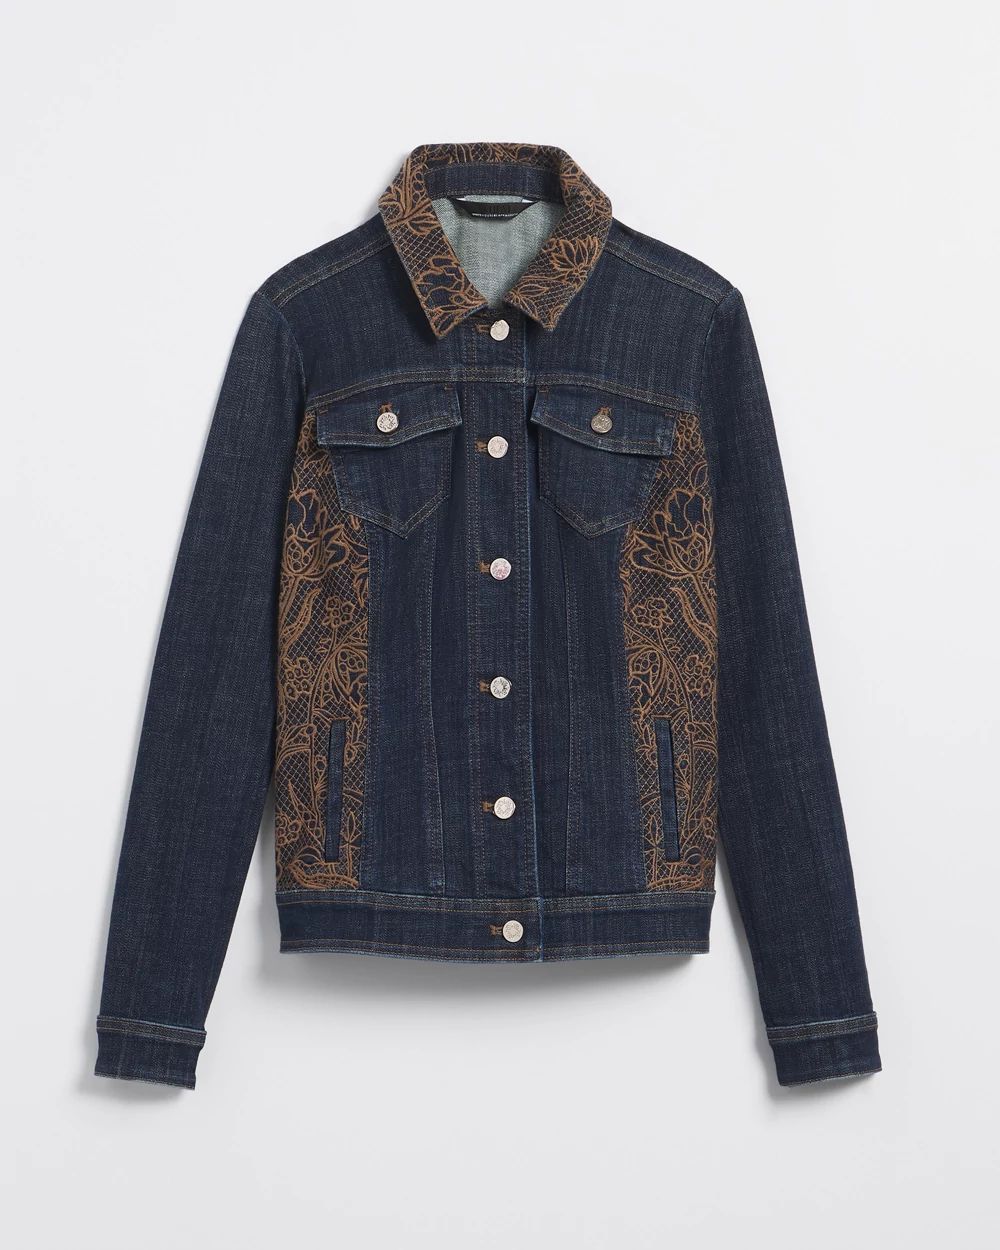 Embroidered Eyelet Denim Jacket click to view larger image.